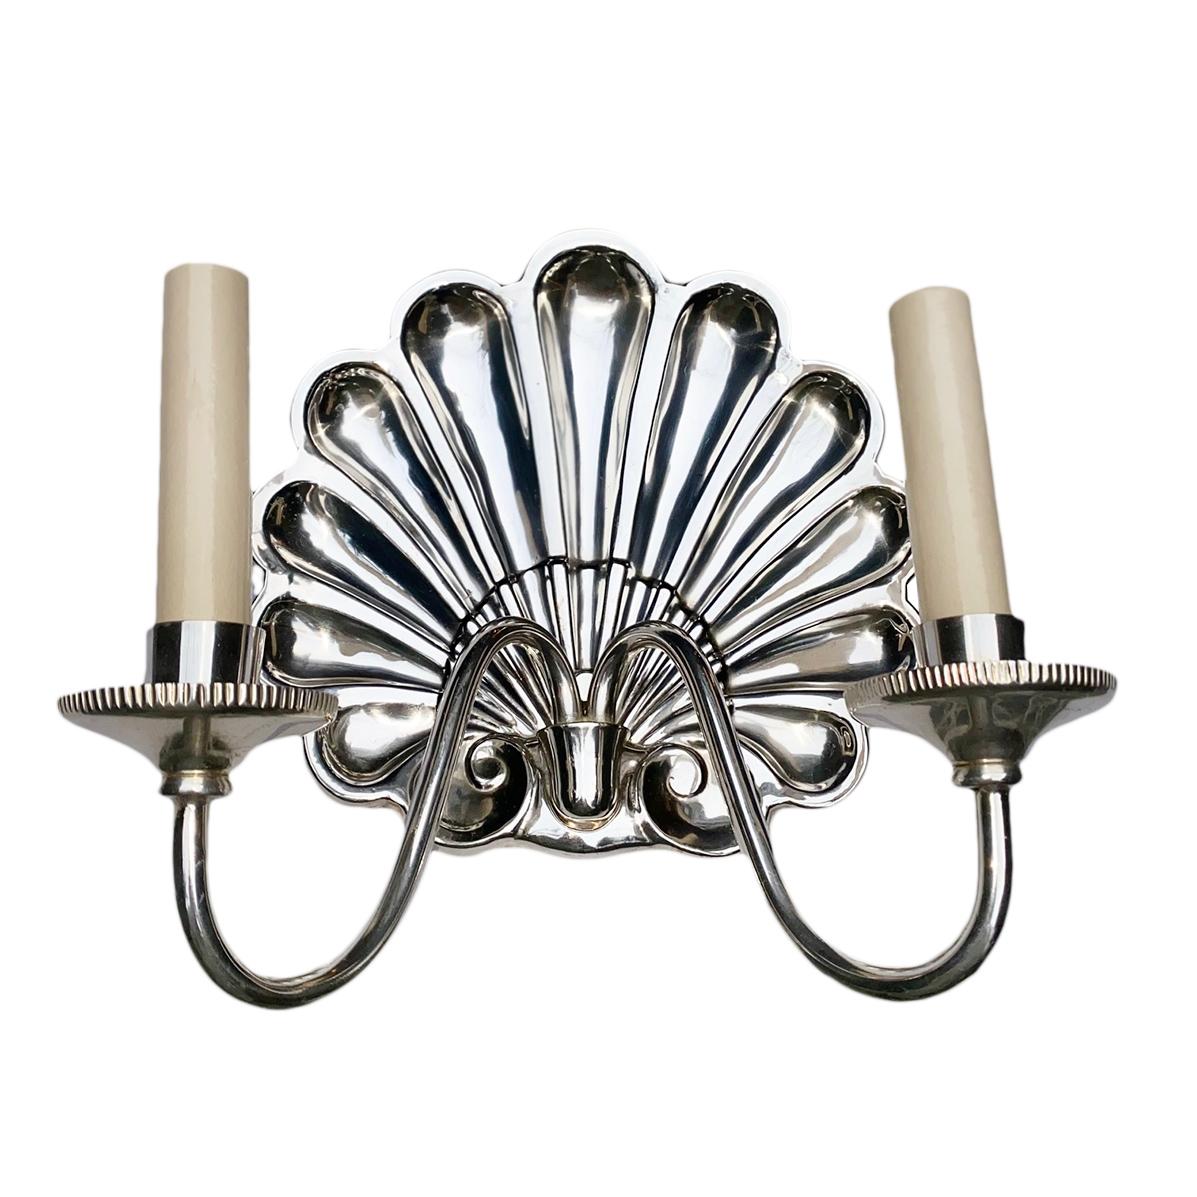 Pair of circa 1950's American silver-plated double-light shell-shaped sconces.

Measurements:
Height: 10.5